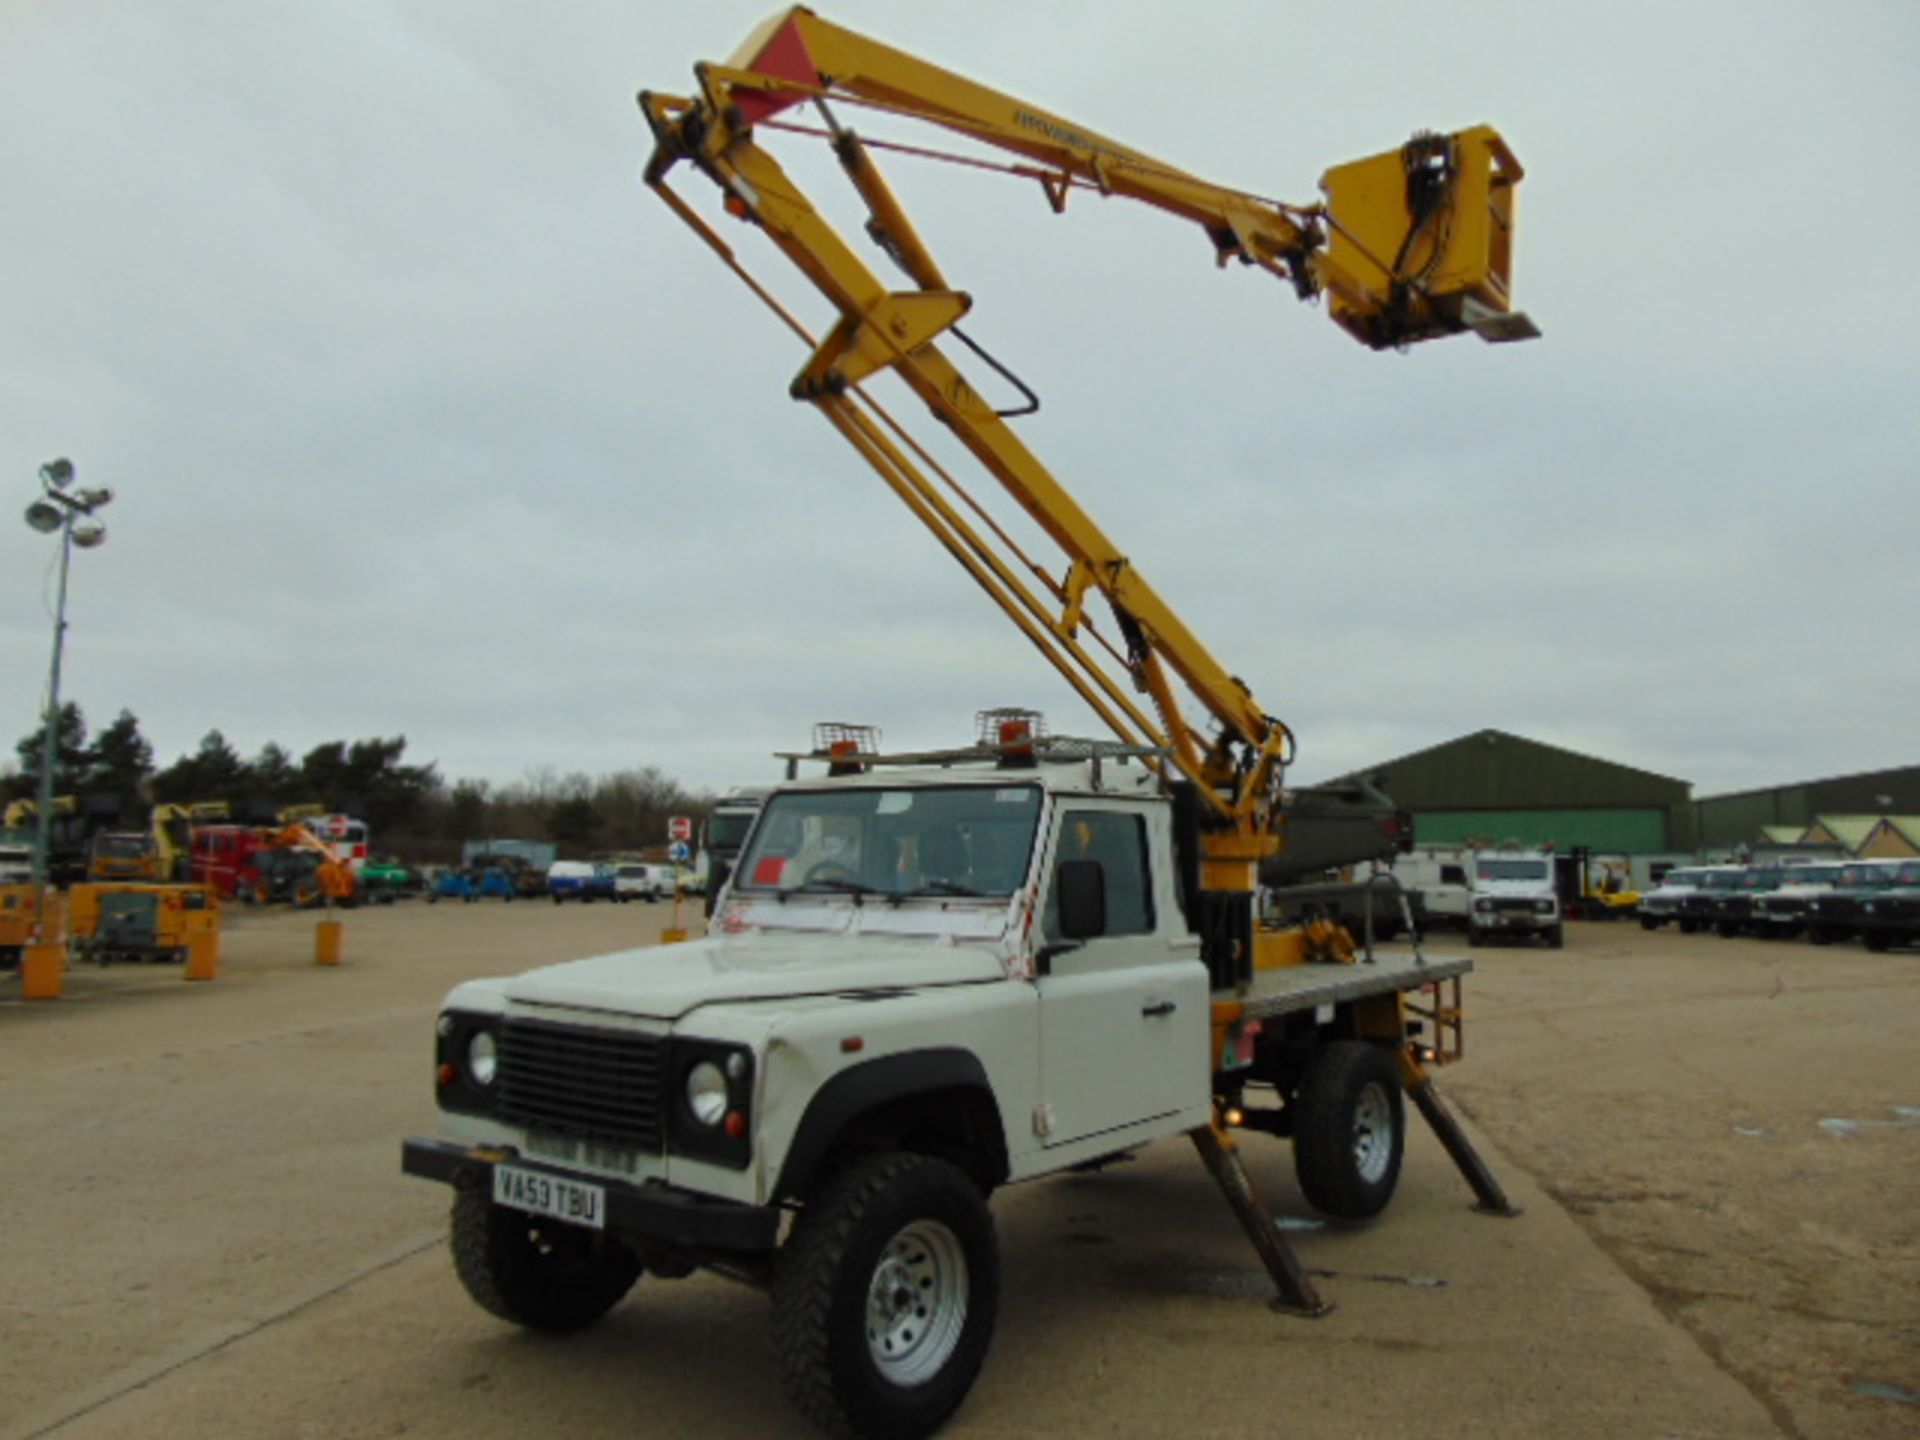 Land Rover Defender 130 TD5 Cherry Picker / Access Lift - Image 3 of 22